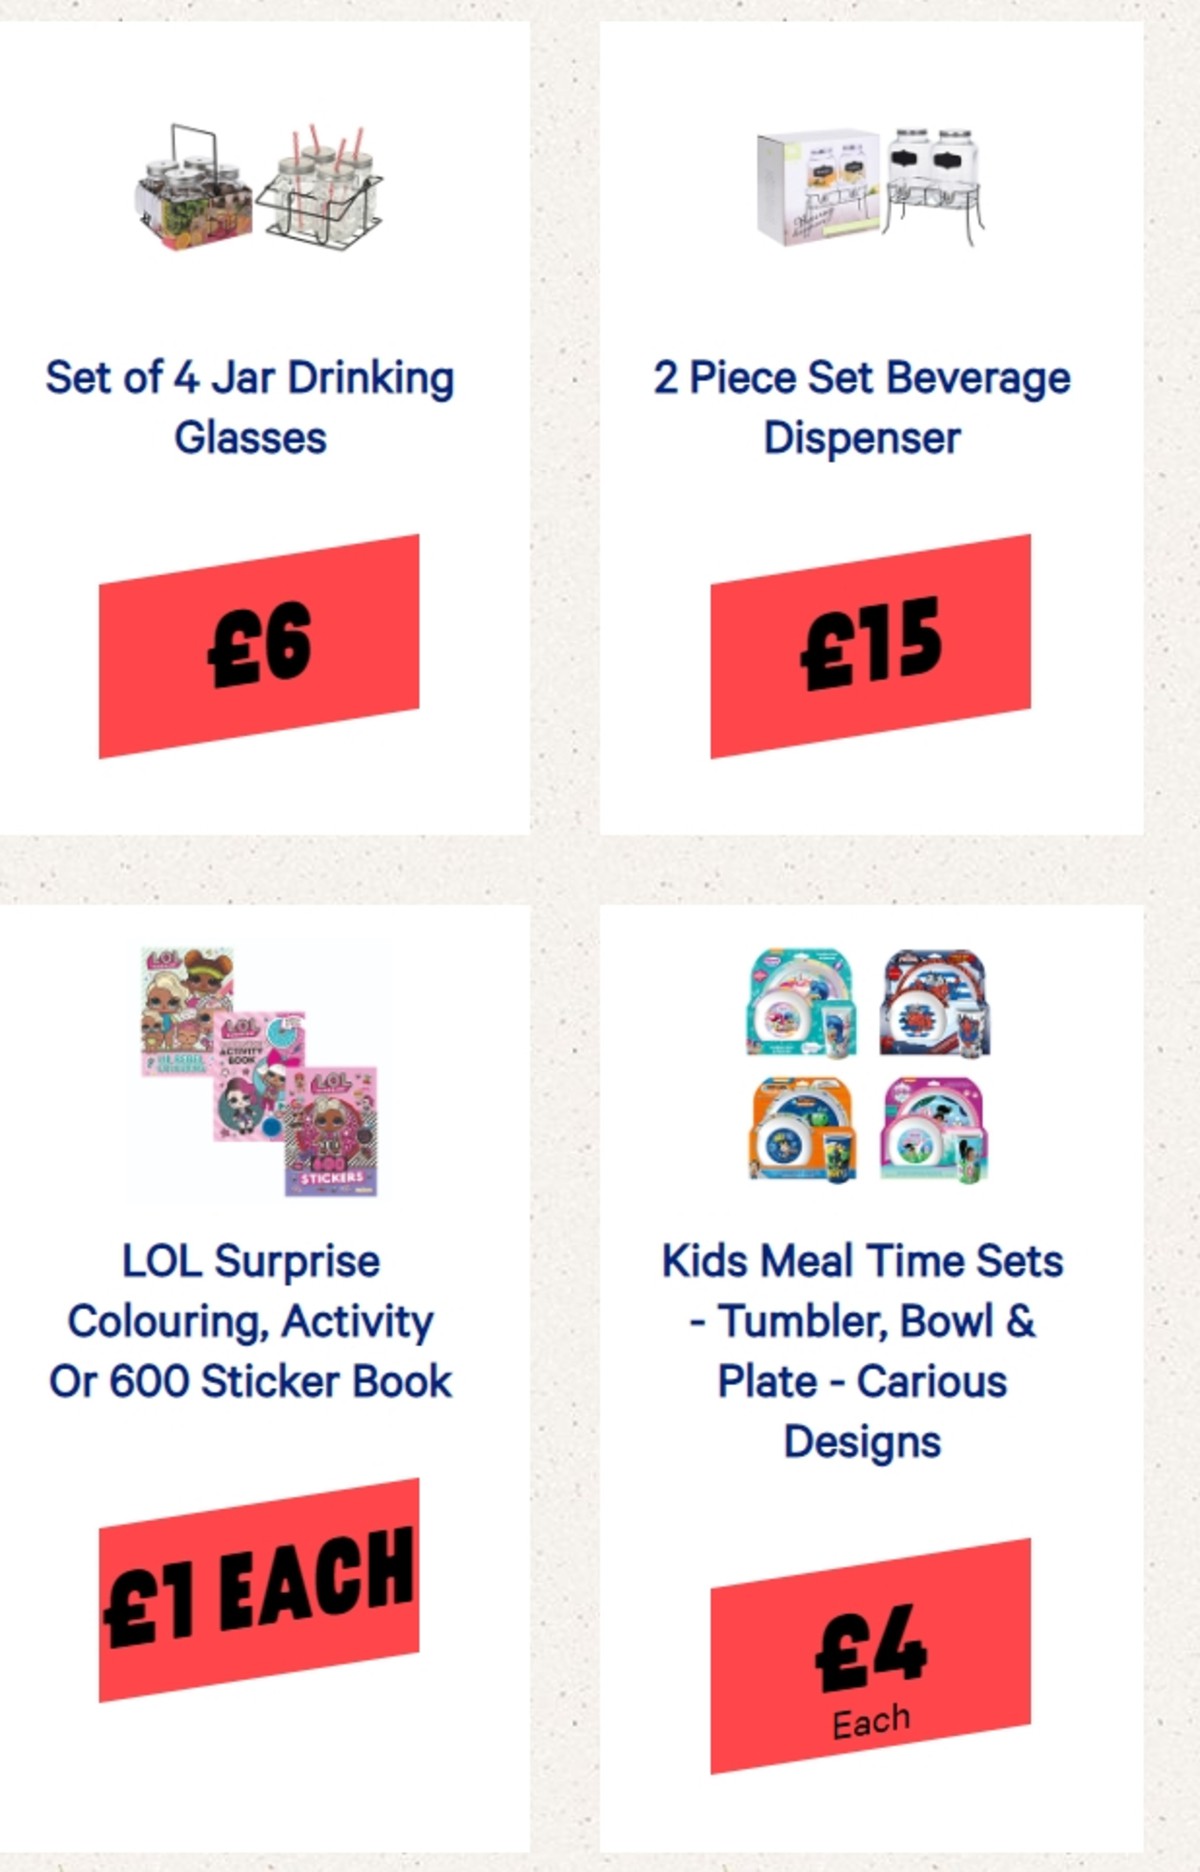 Jack's Offers from 8 May